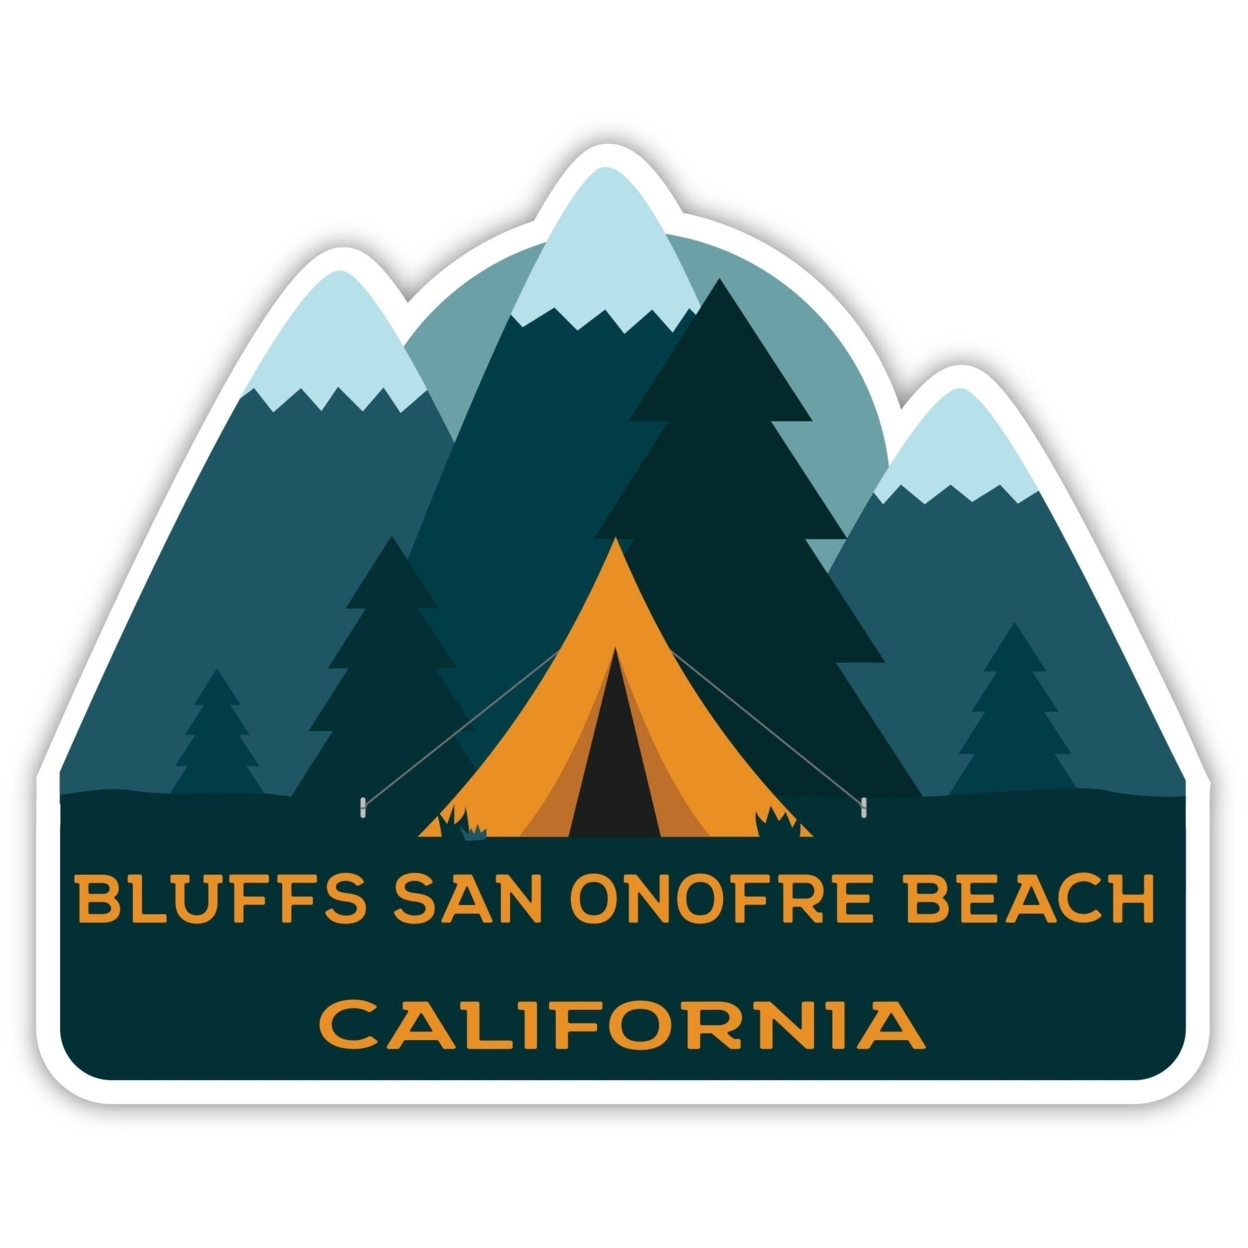 Bluffs San Onofre Beach California Souvenir Decorative Stickers (Choose Theme And Size) - 4-Pack, 12-Inch, Camp Life